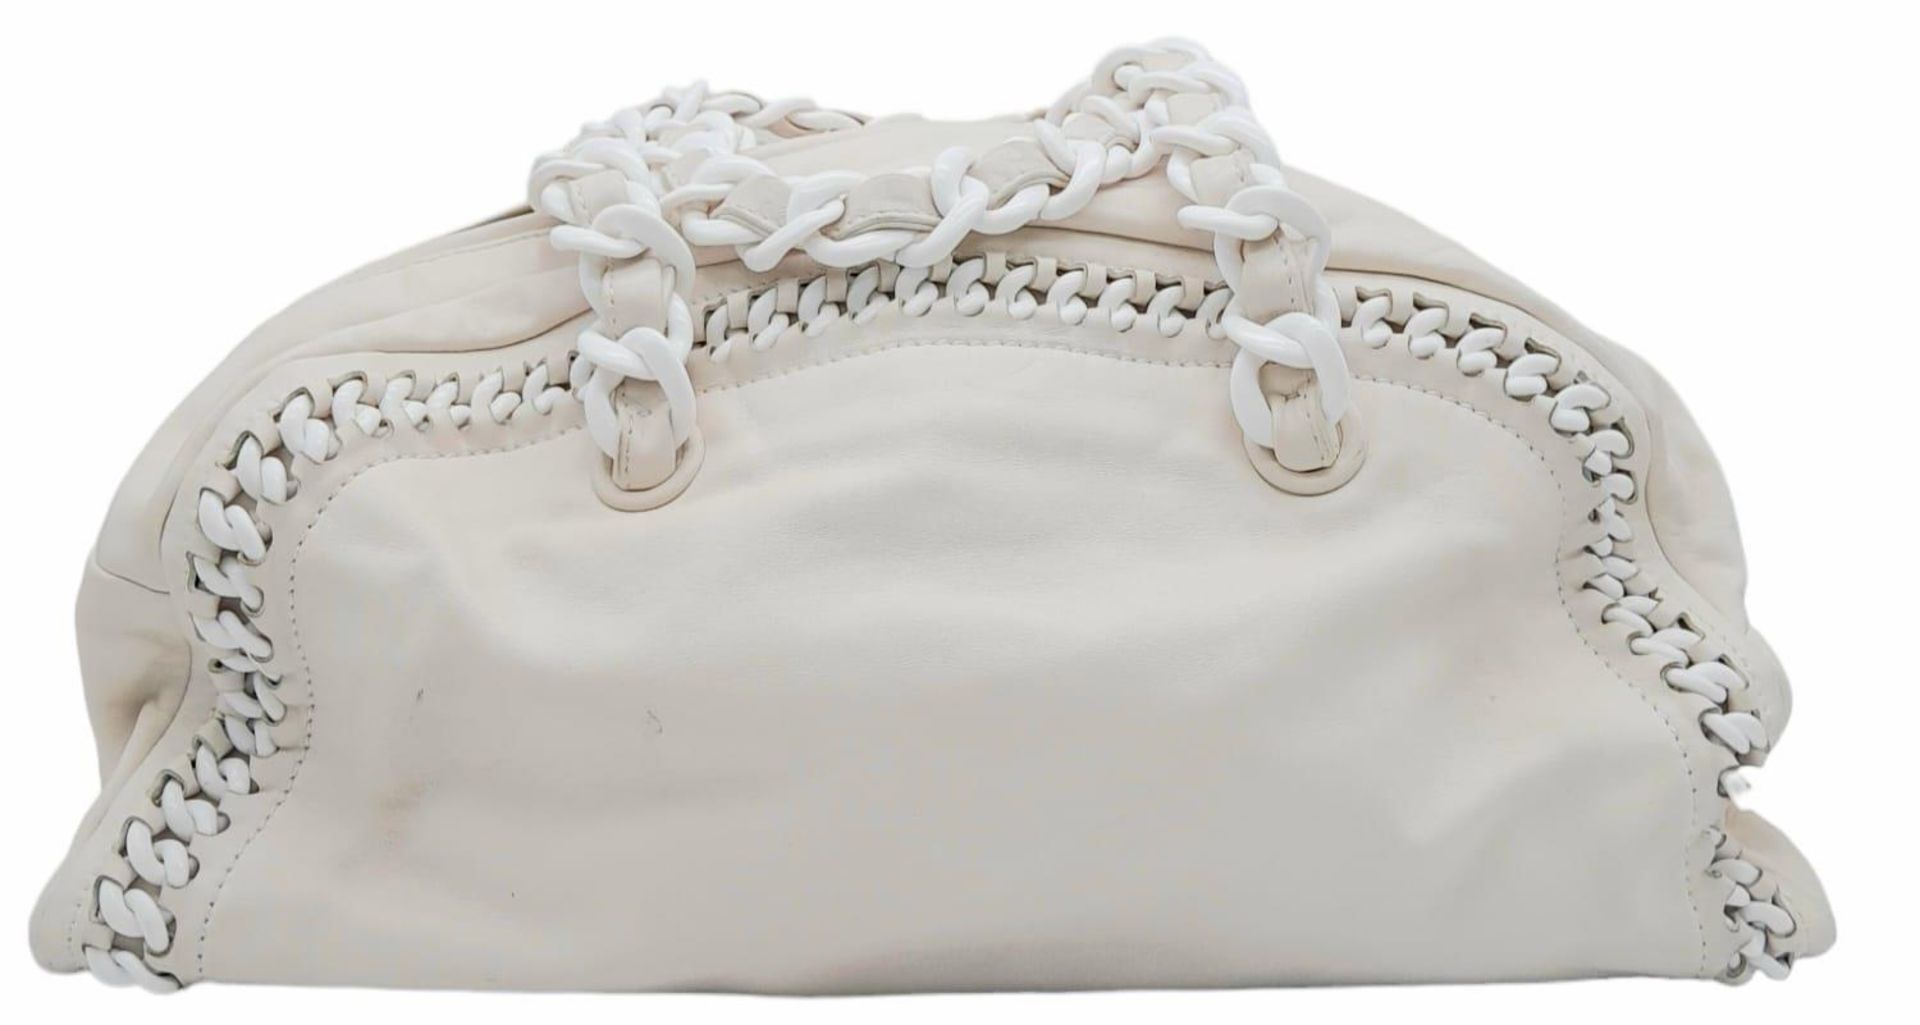 A Chanel Cream Crinkled Leather Chain Bag. Interwoven chain and leather top handles. Zip closure - Image 2 of 10